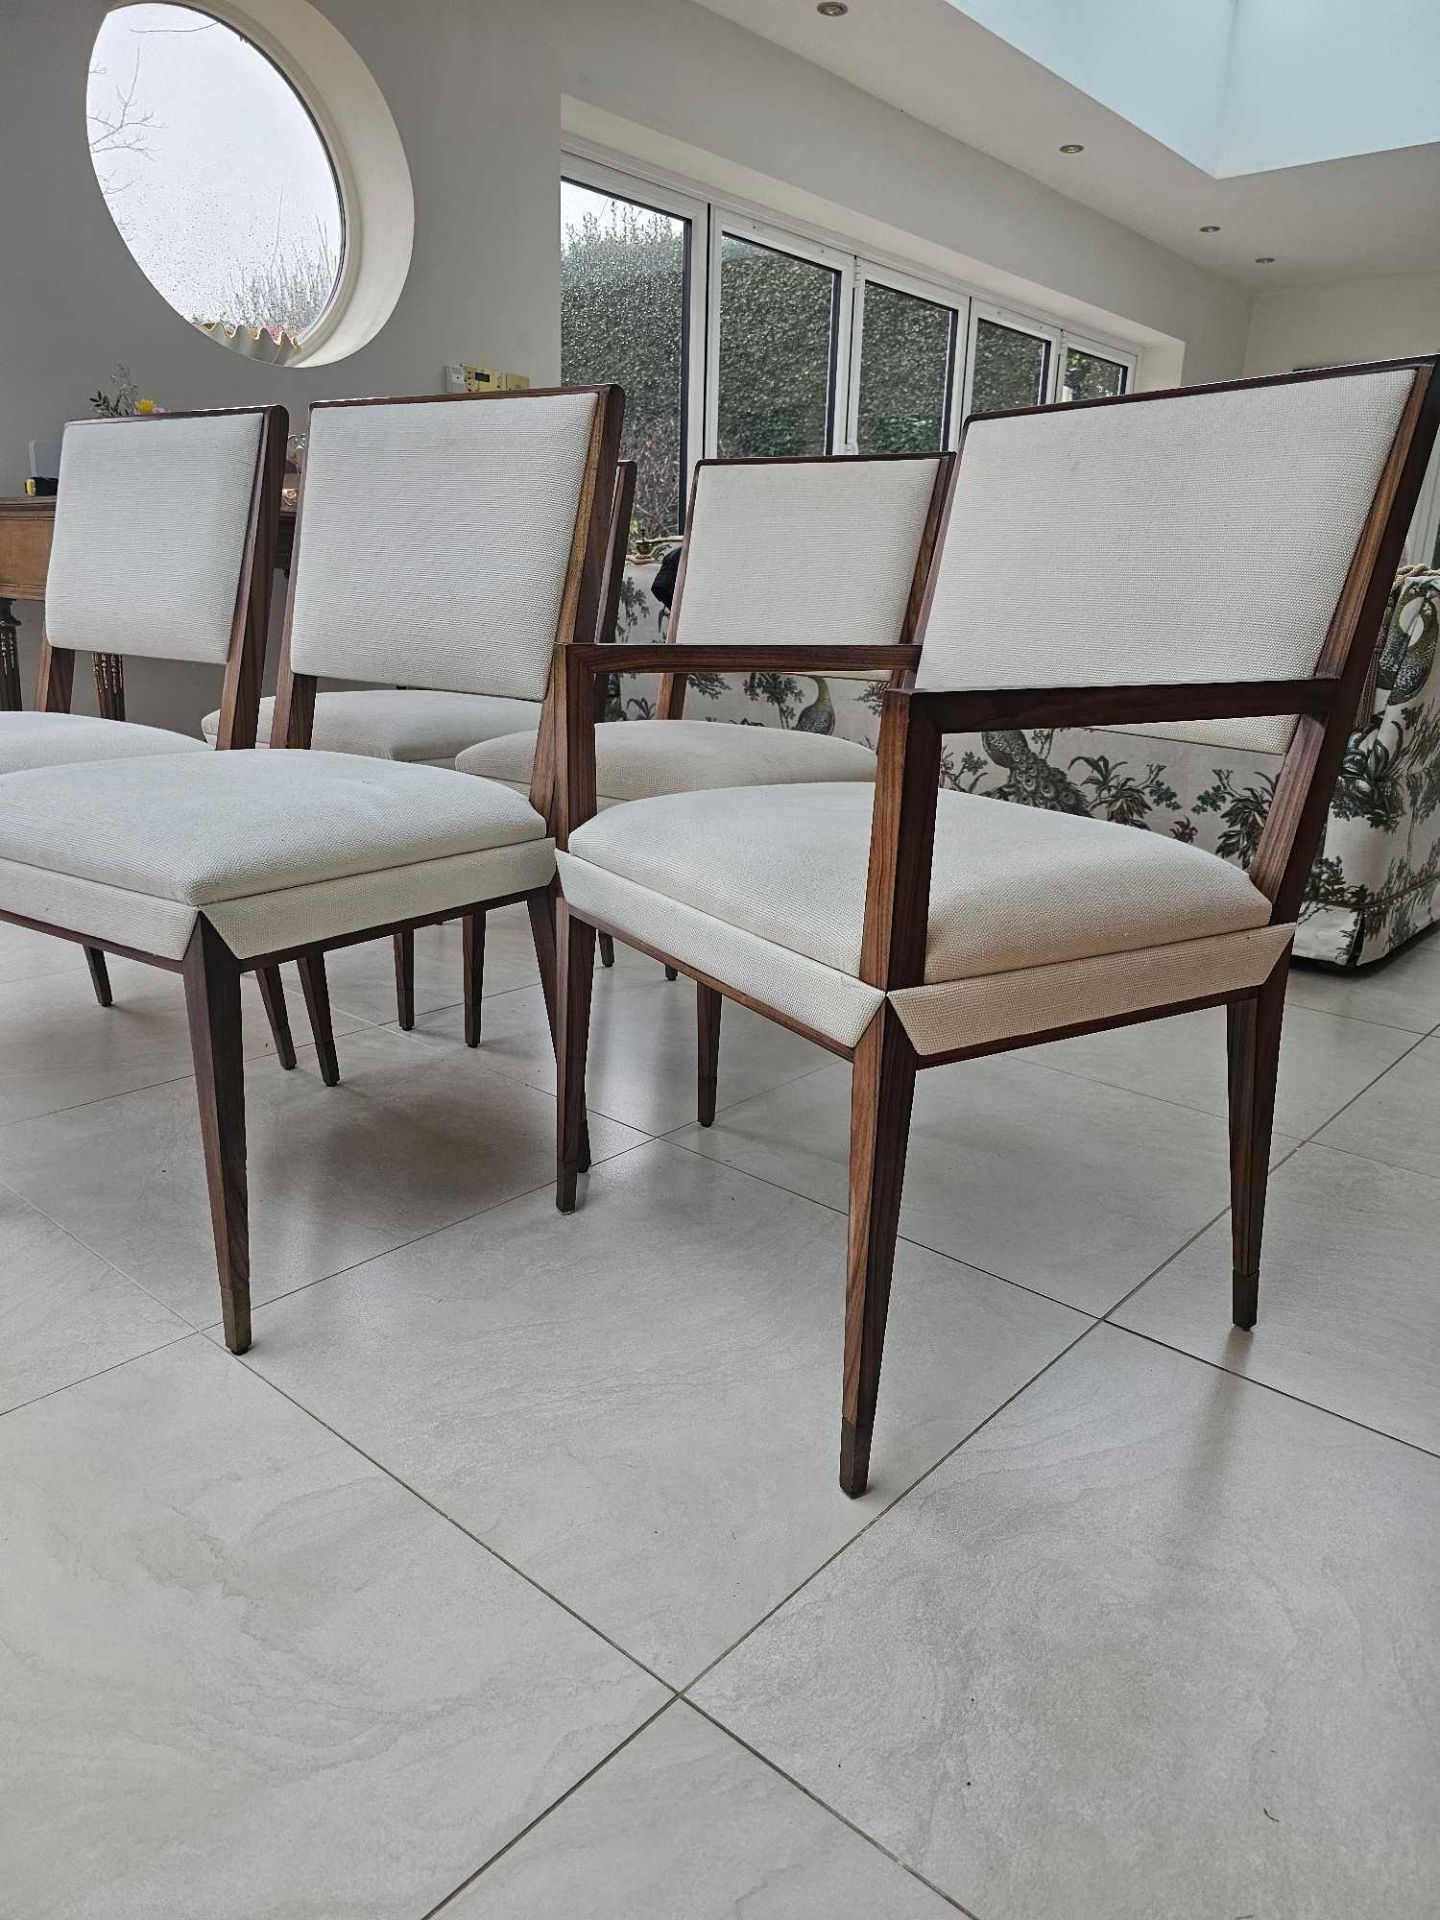 Tracey Boyd Reform Side Chairs Upholstered In Madison Dove X 4 Complete With A Armchair To Match - Image 4 of 5